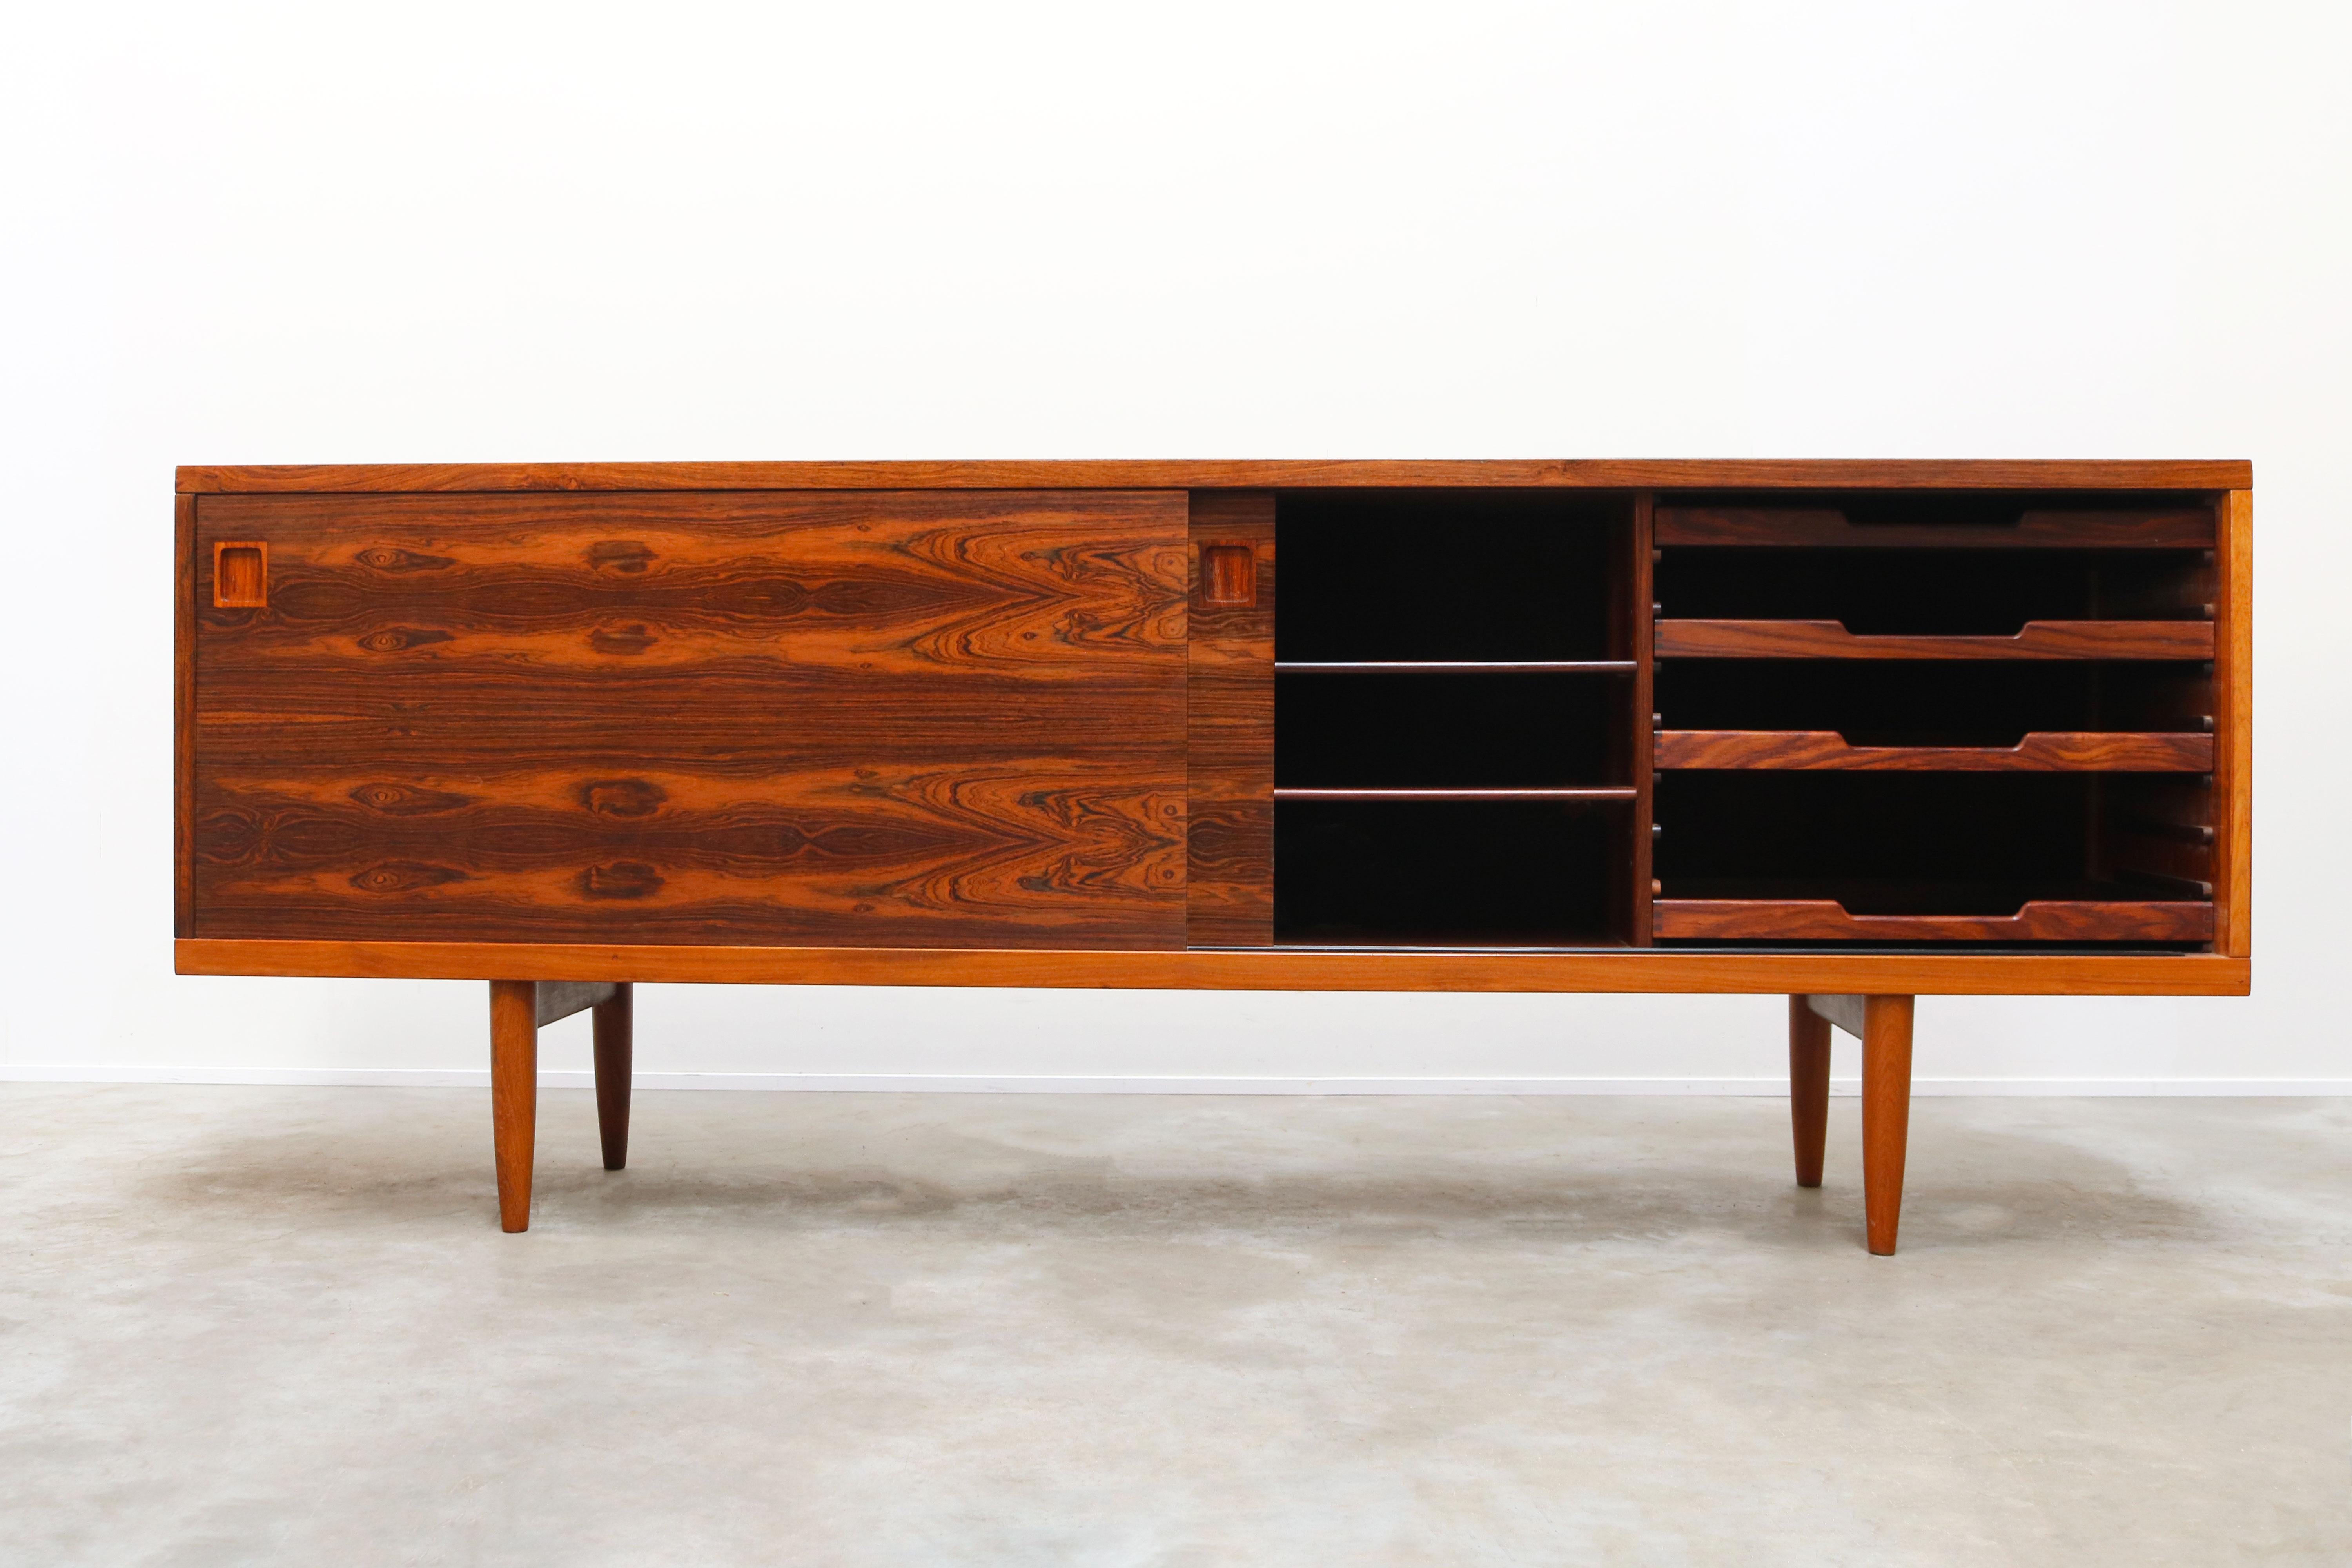 Mid-20th Century Rare Danish Credenza / Sideboard Model 20 by Niels Otto Moller 1950 Rosewood For Sale